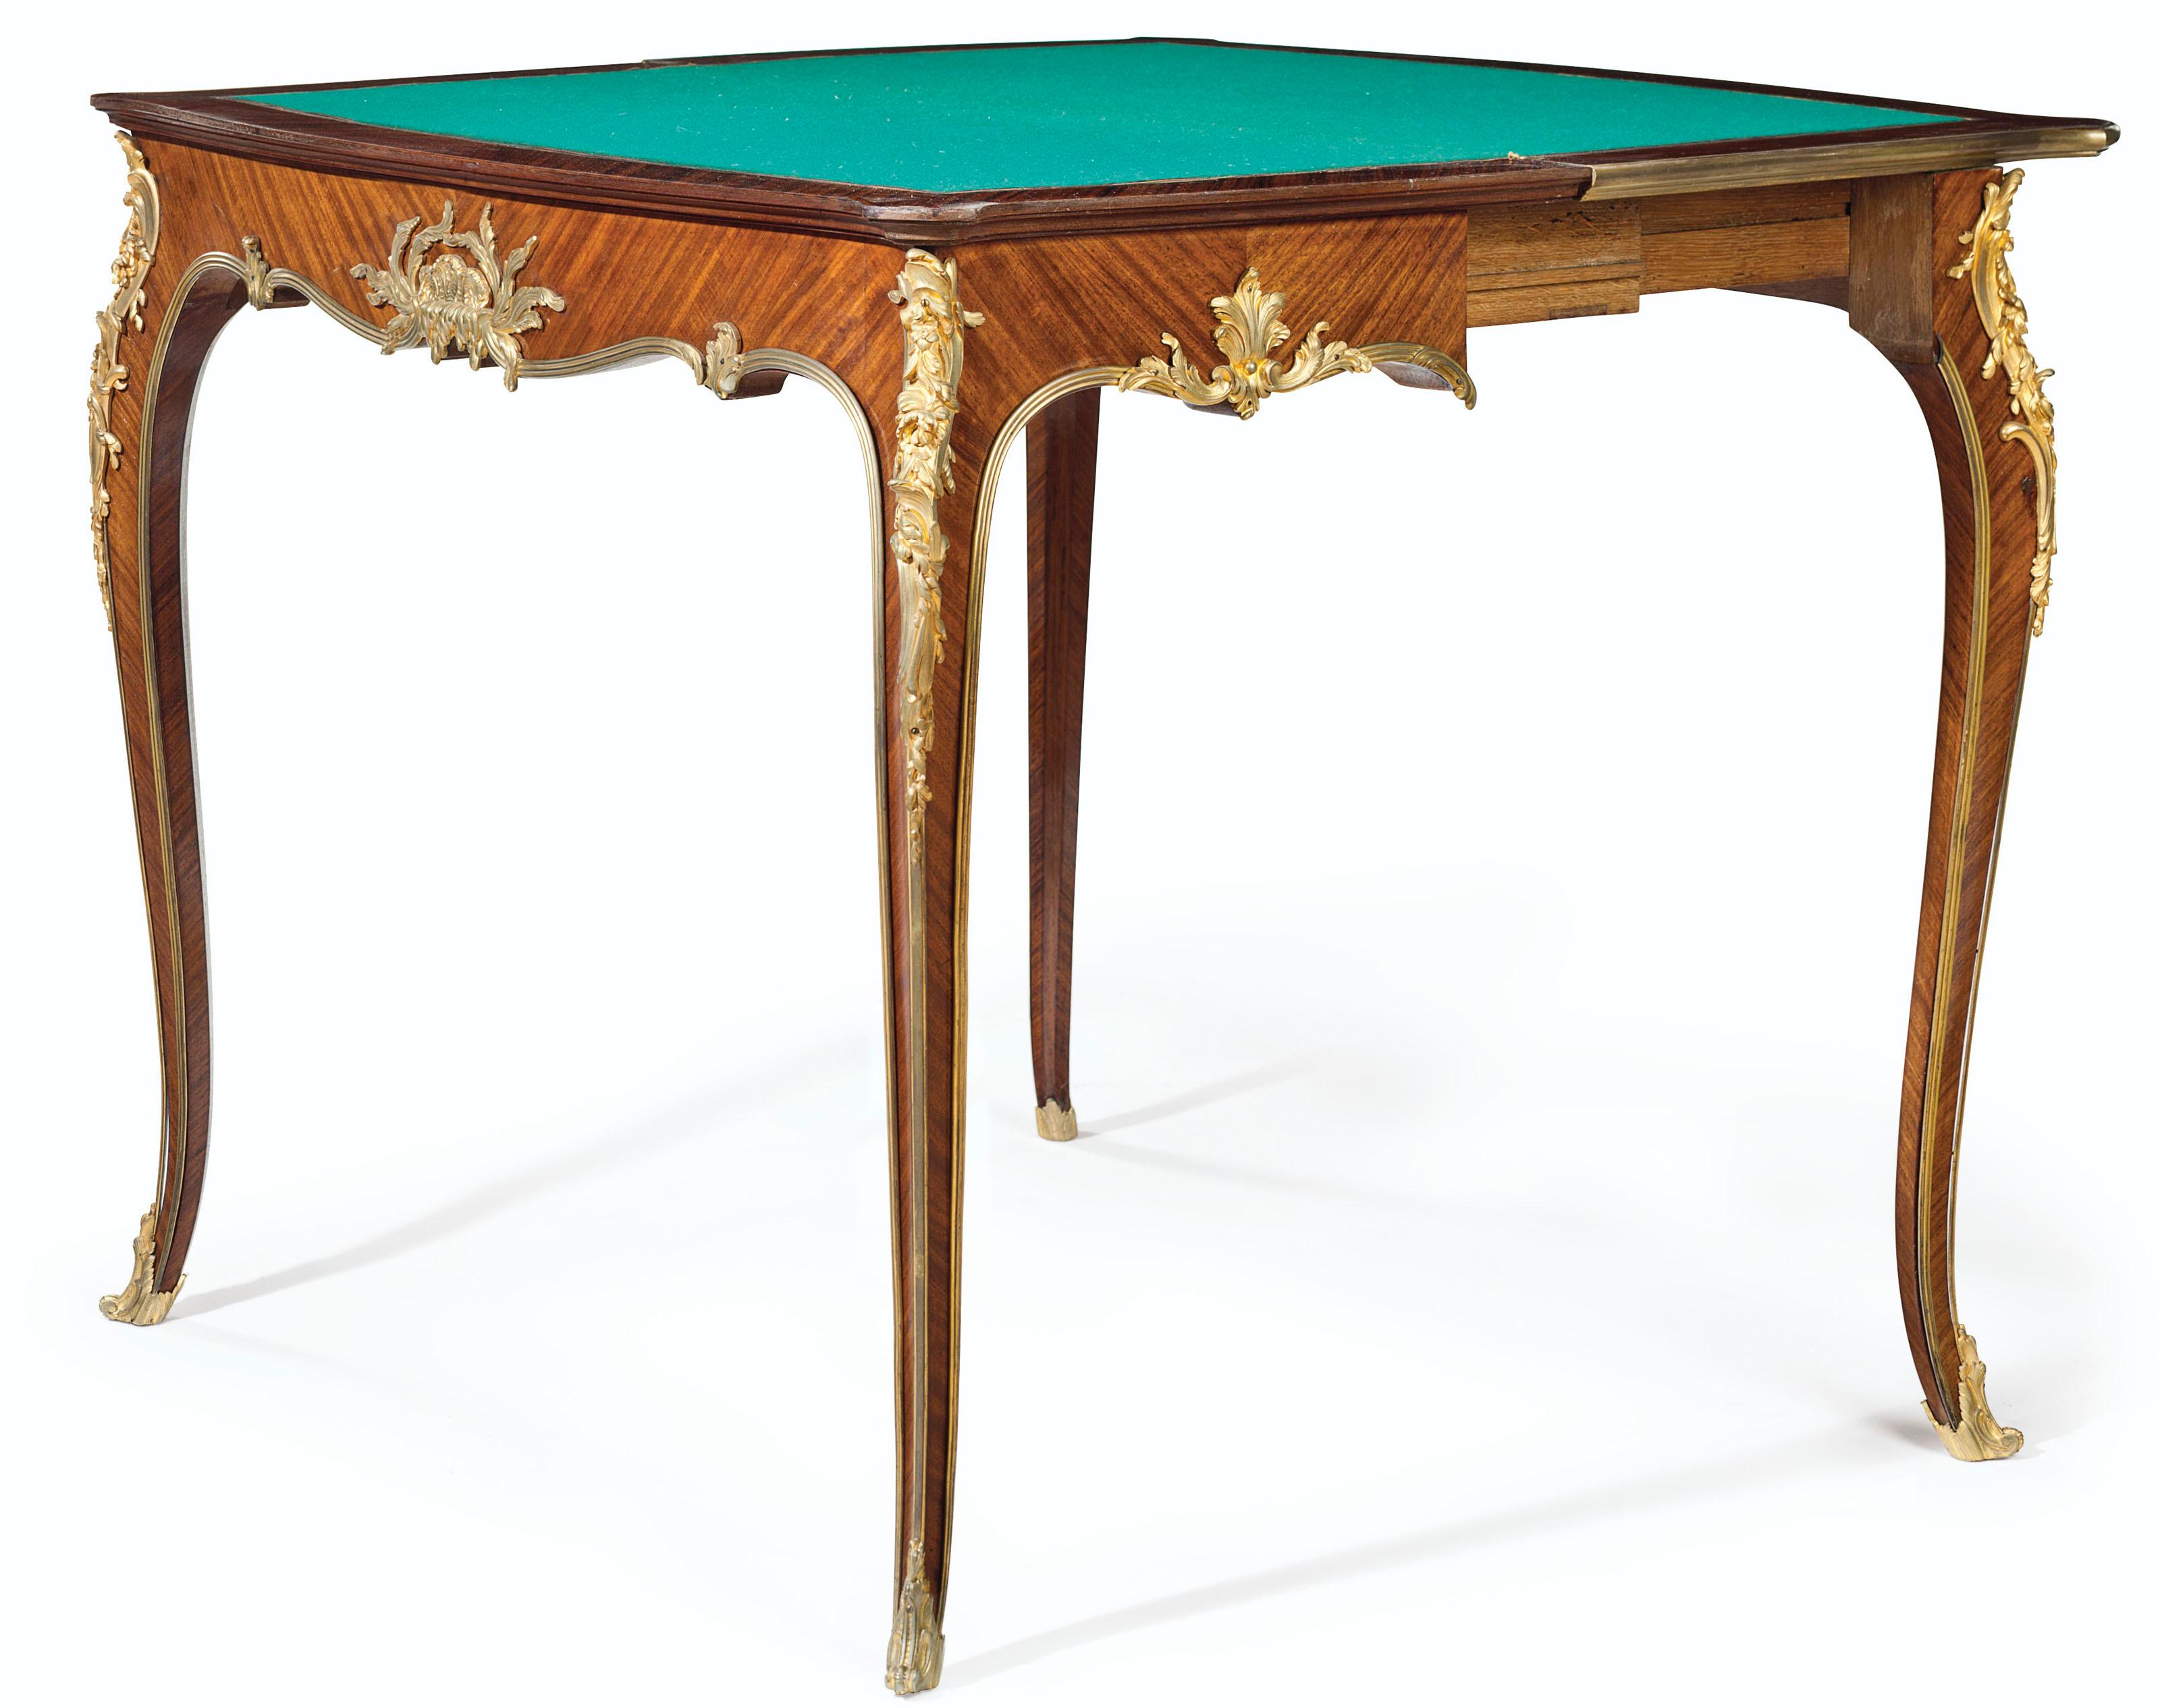 Late 19th Century French Ormolu-Mounted Kingwood and Satin Parquetry Games Table In Good Condition For Sale In SAINT-JEAN-CAP-FERRAT, FR